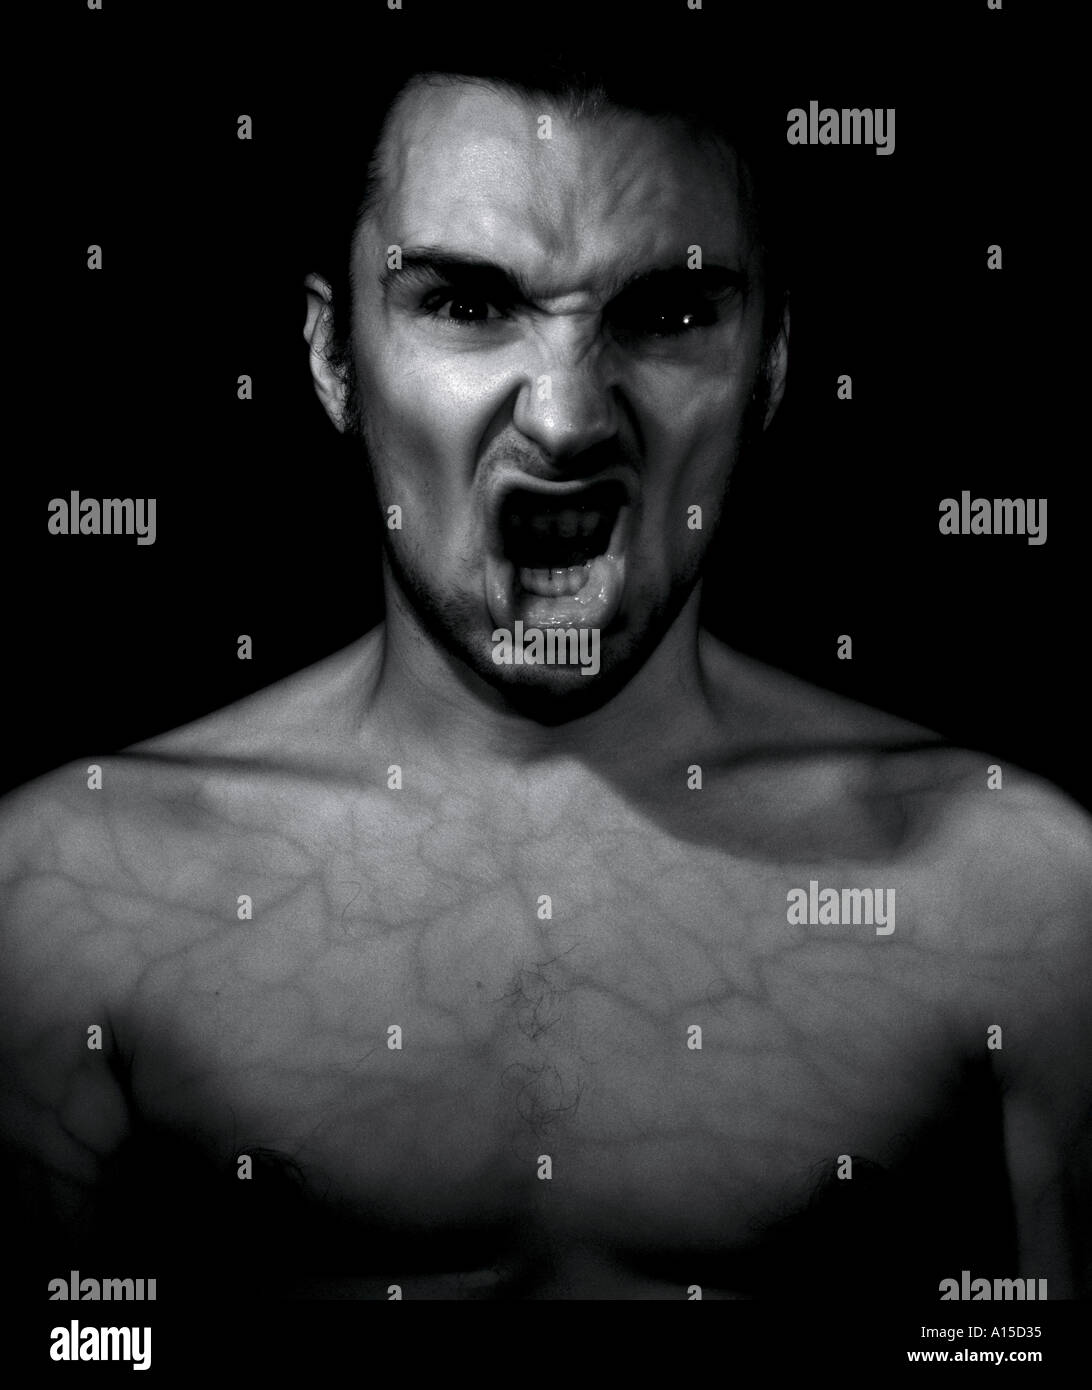 Bust of a man screaming in rage Stock Photo - Alamy